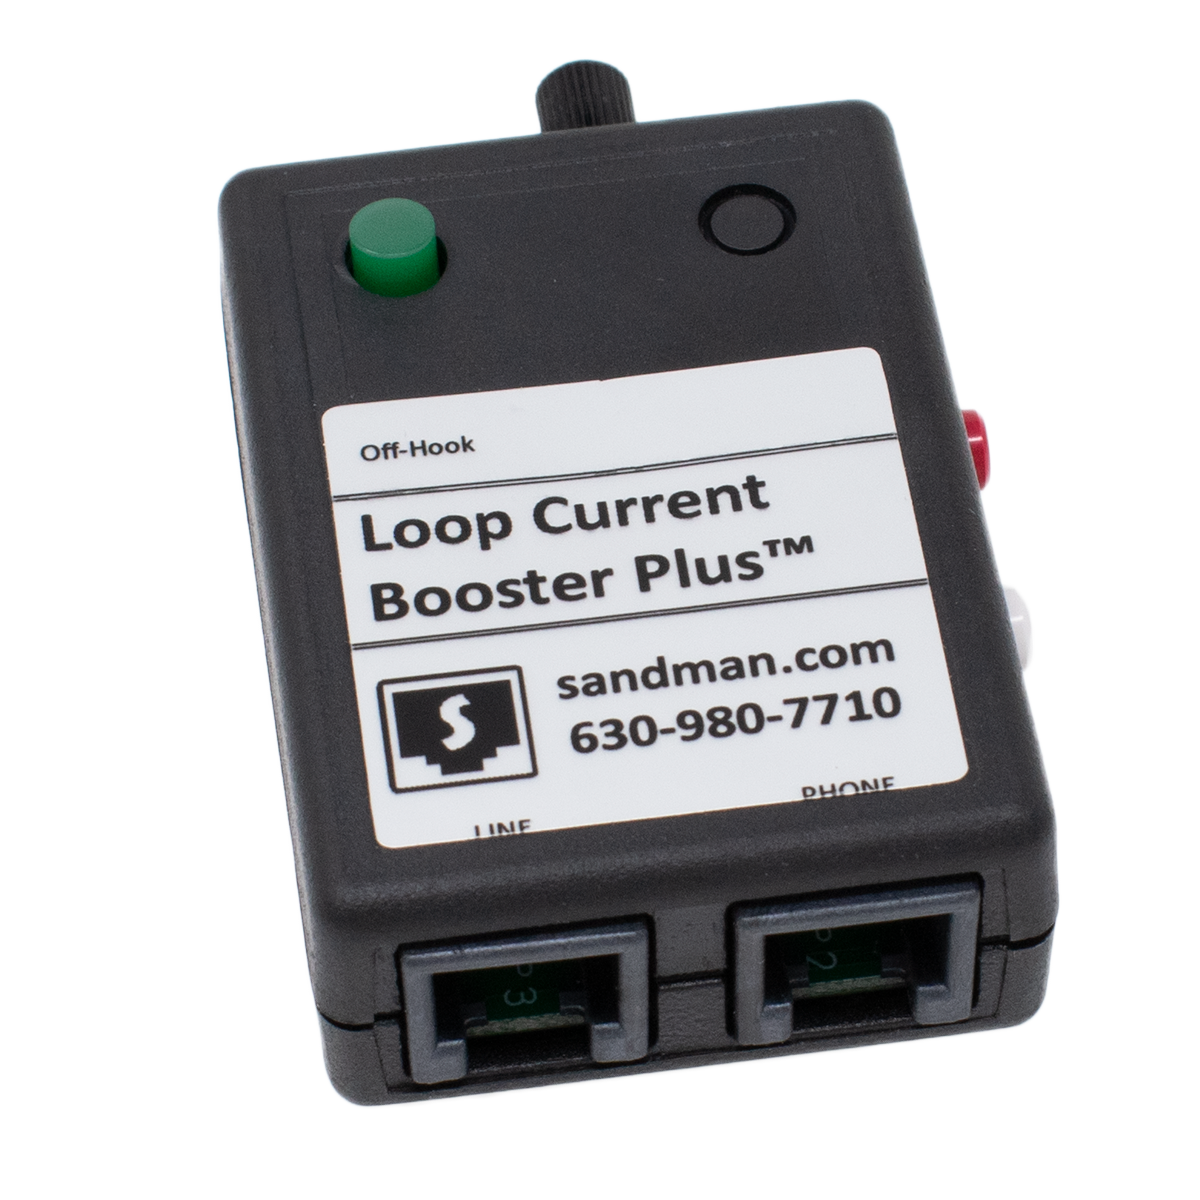 Loop Current Booster™ PLUS from sandman.com